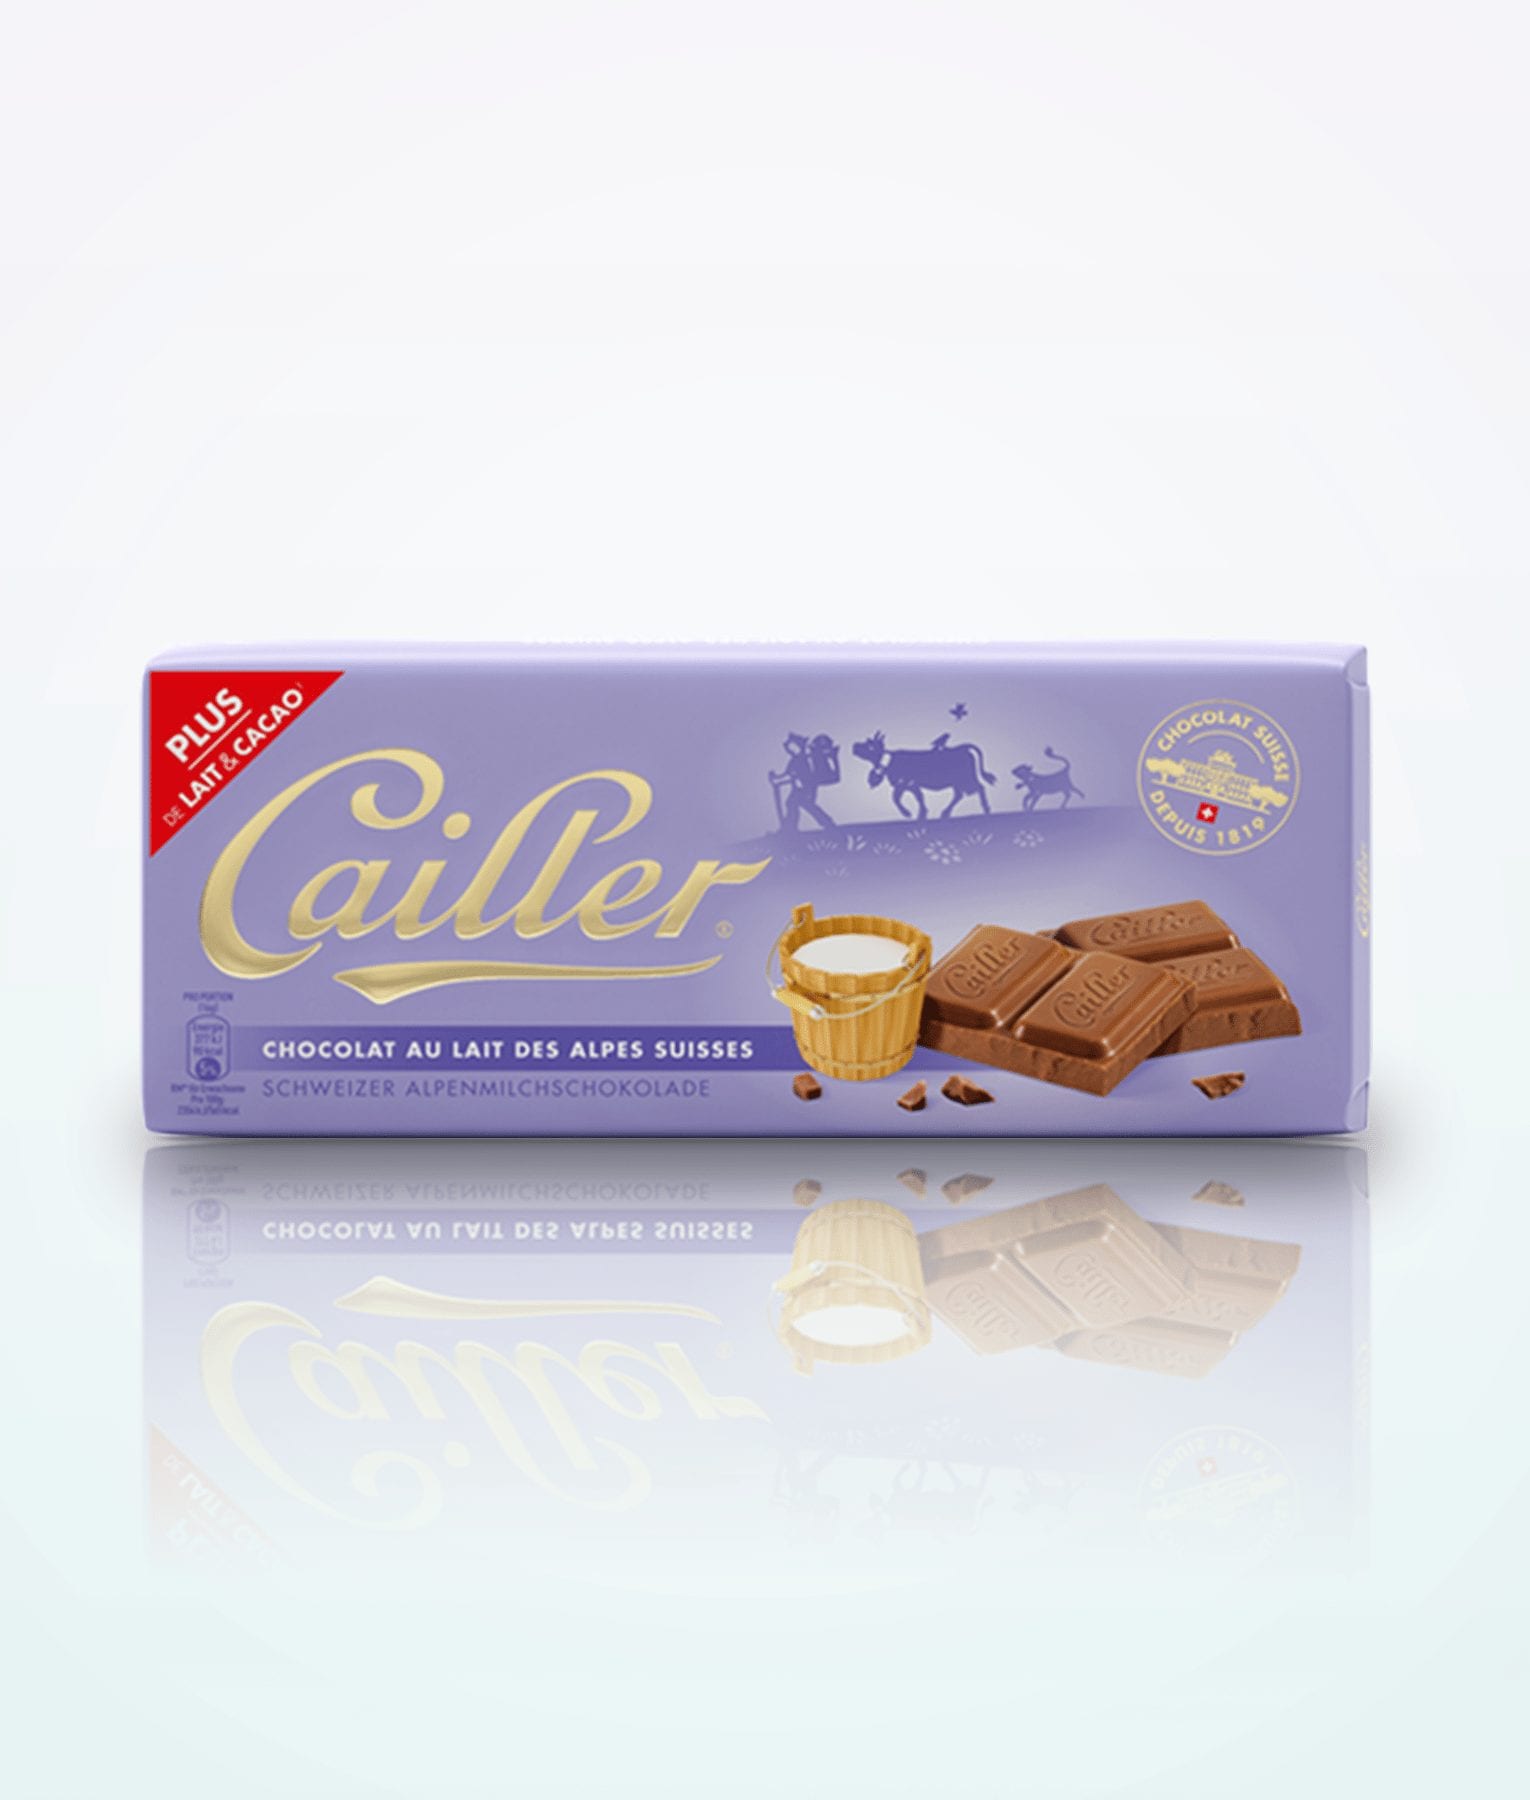 Cailler chocolate